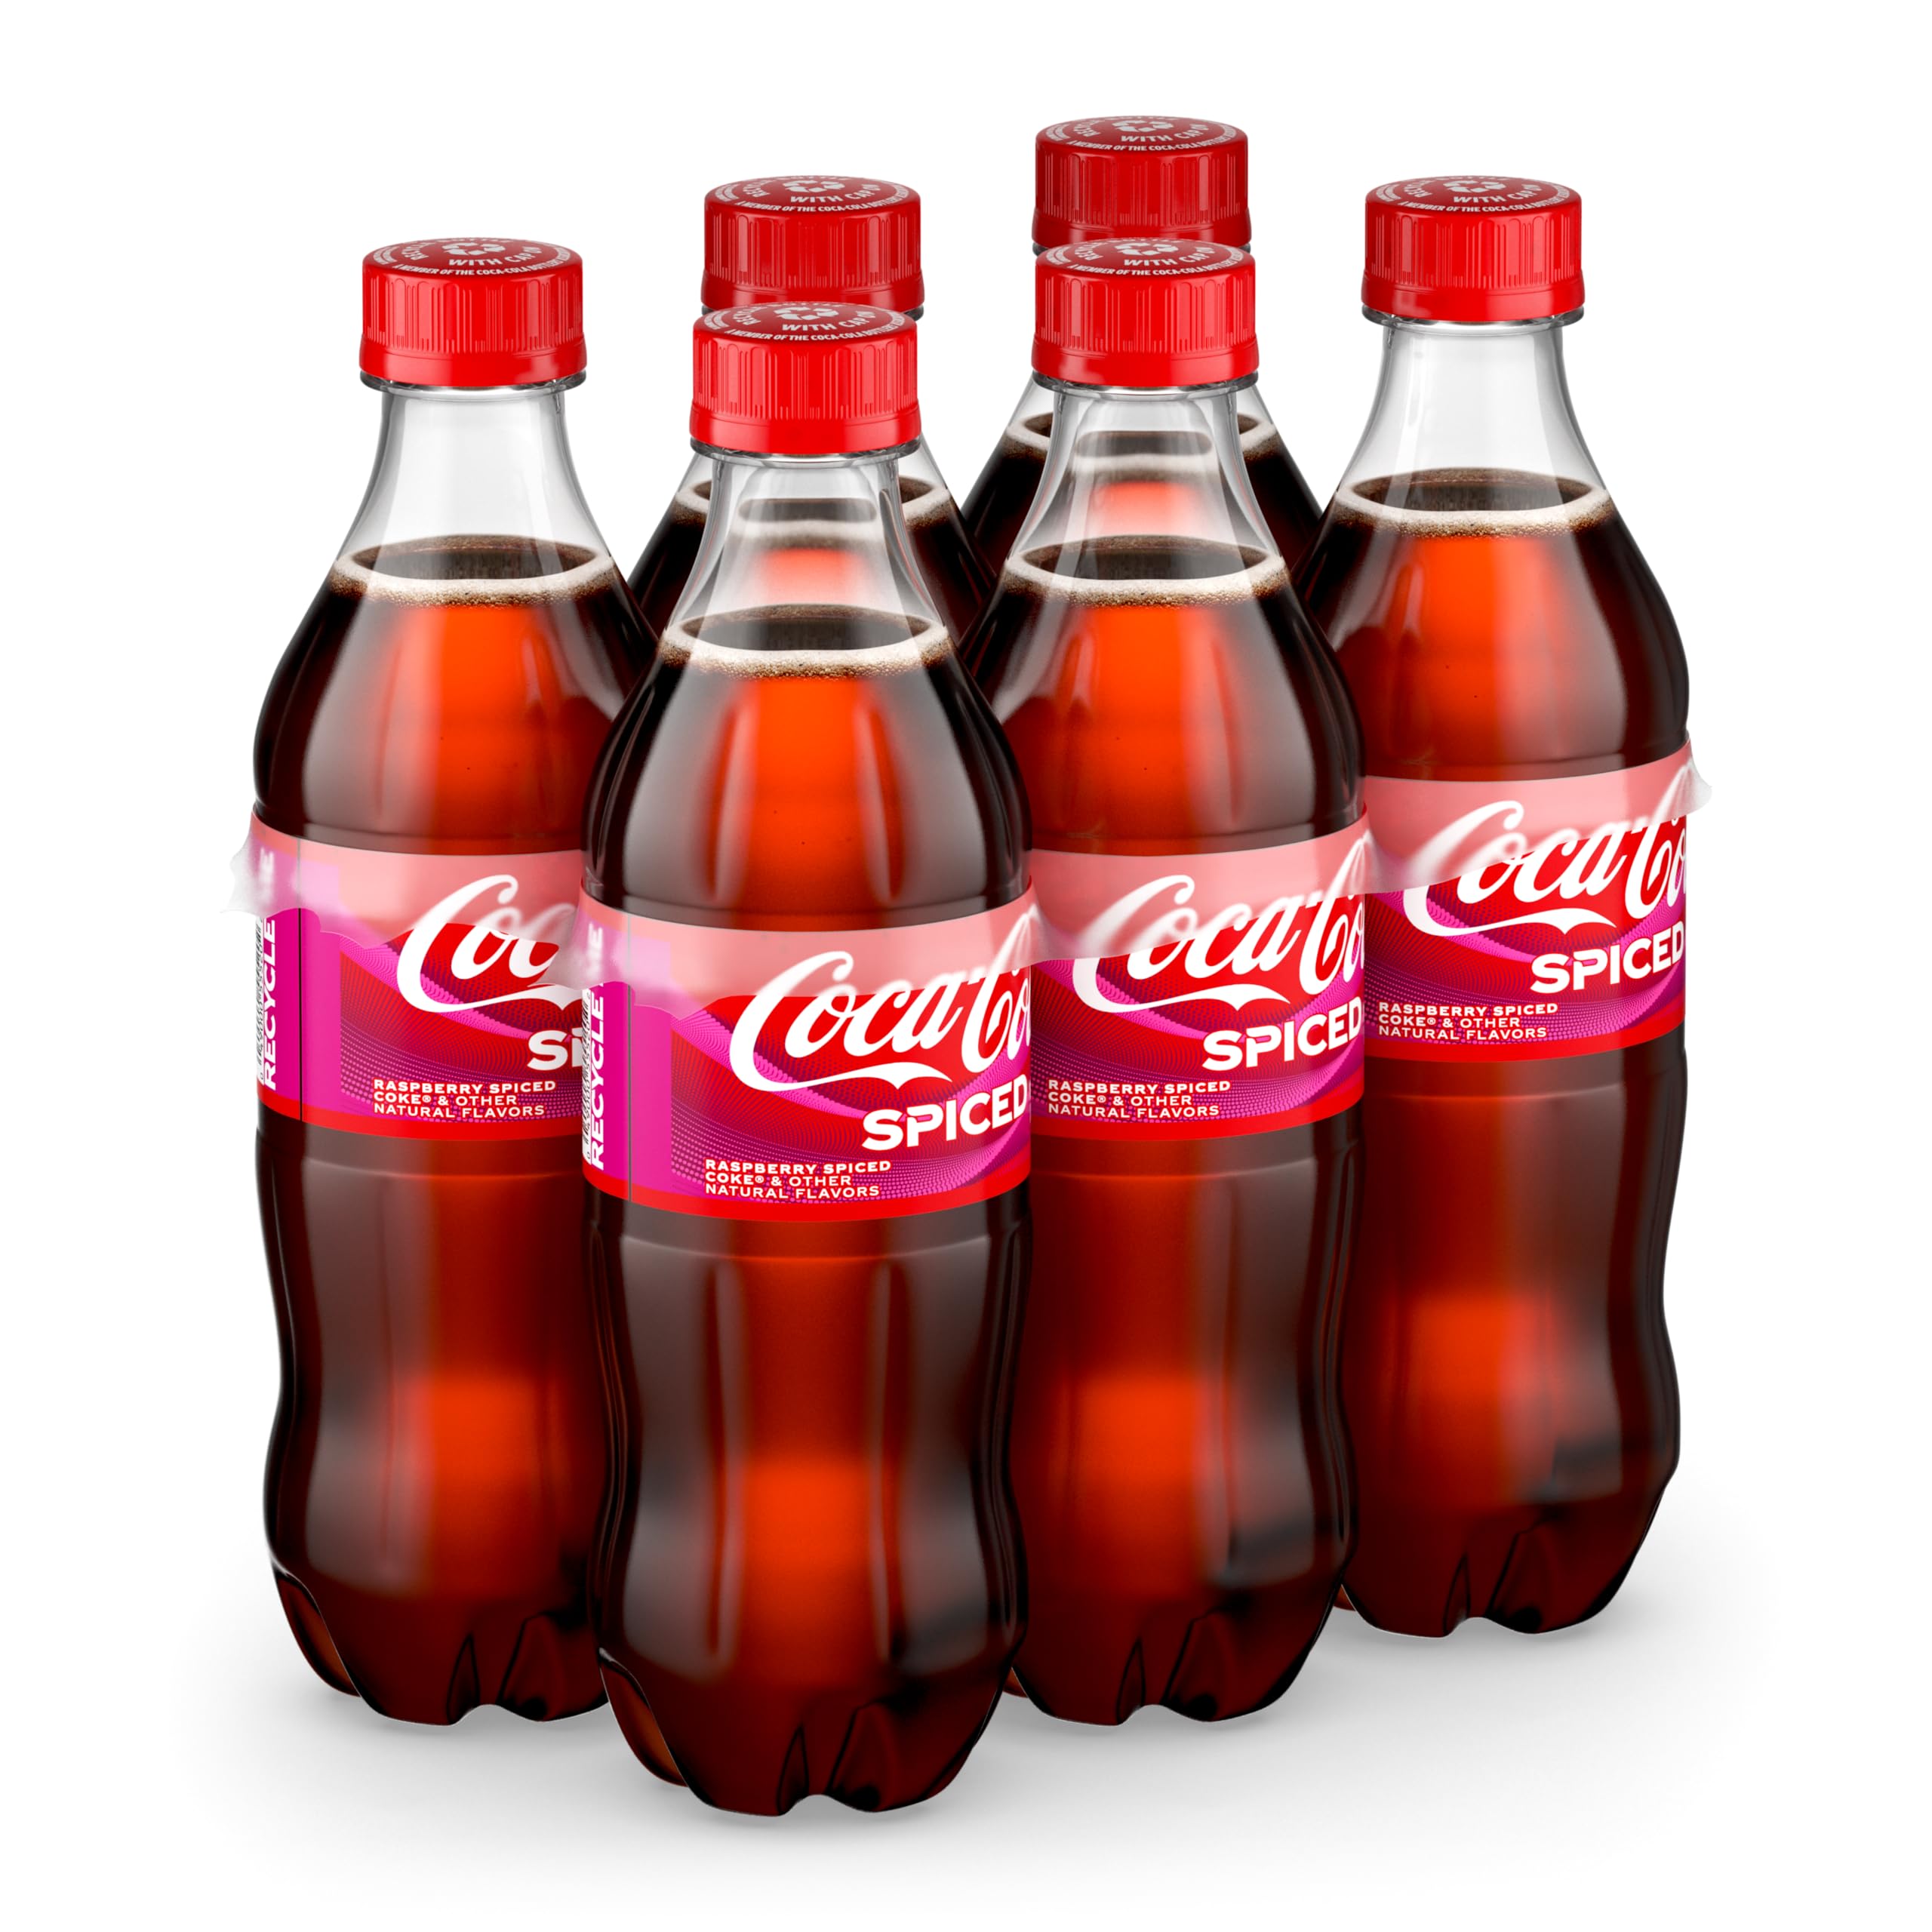 6-Pack 16.9-Oz Coca-Cola Spiced $3.78 w/ S&S + Free Shipping w/ Prime or on orders over $35